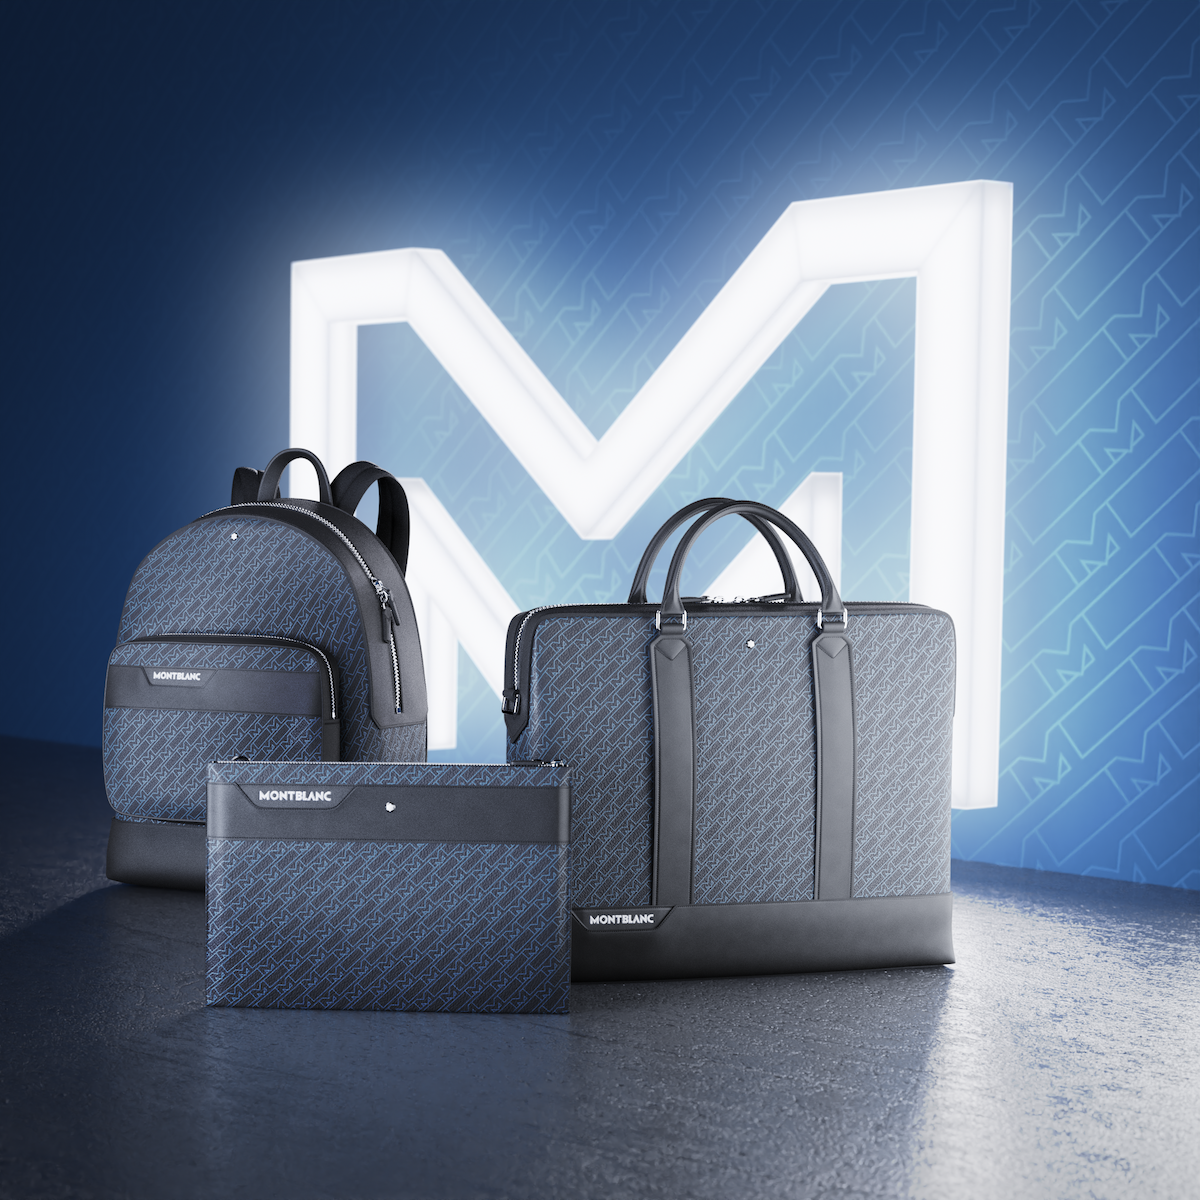 Montblanc Launches Monogrammed Bags